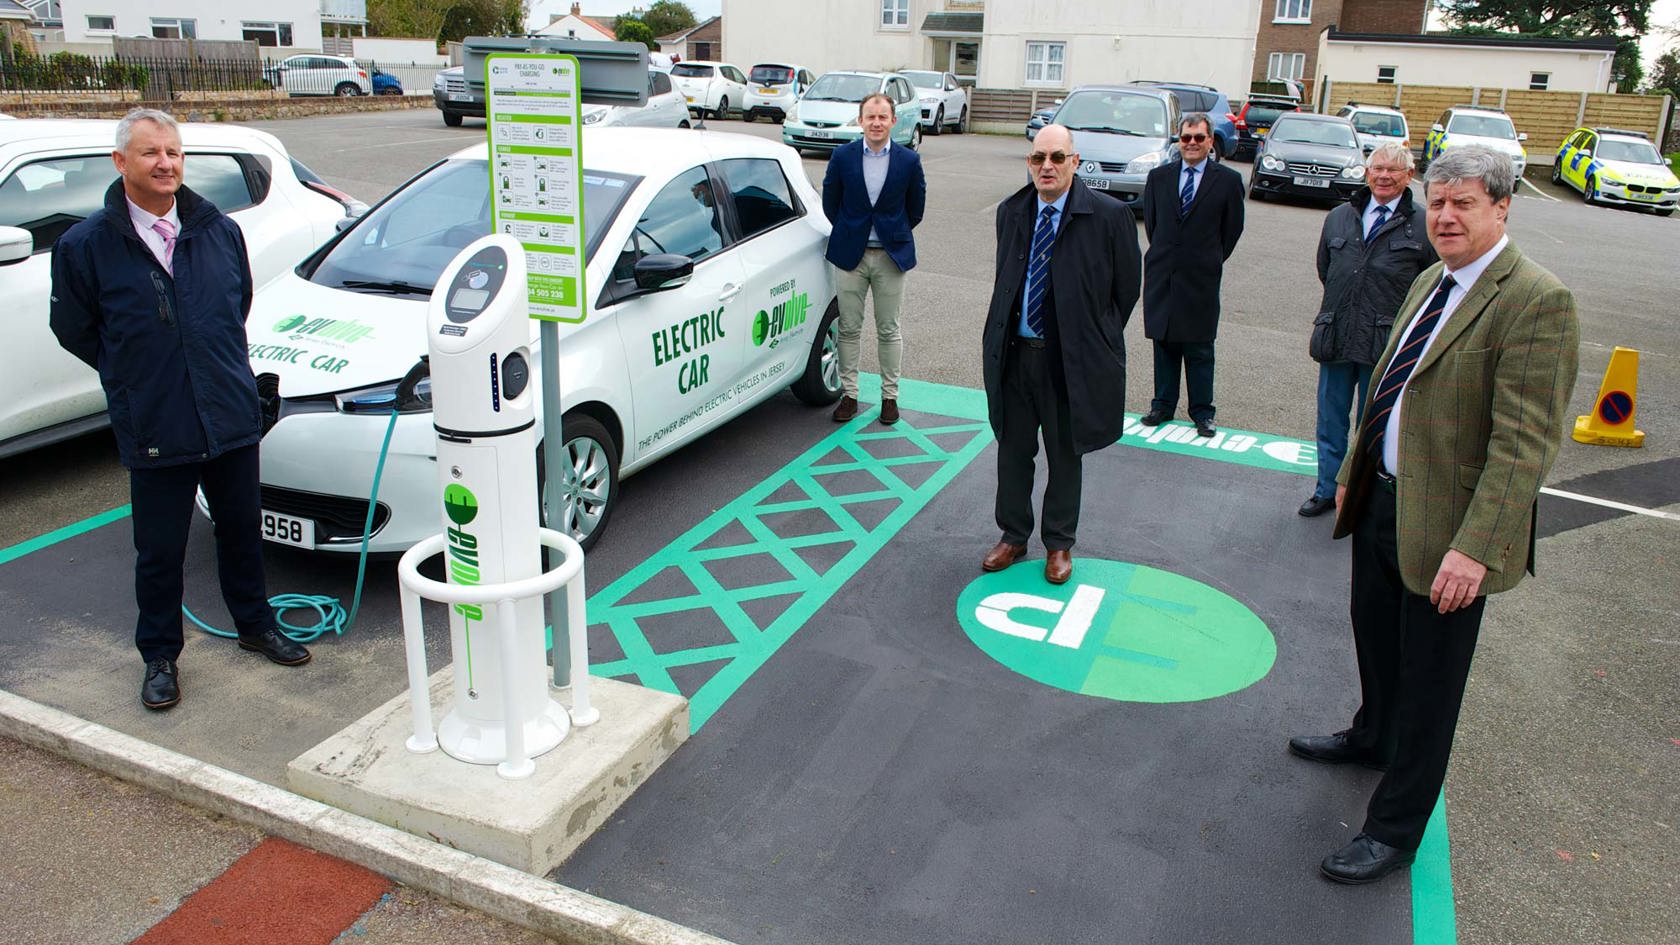 Peter Cadiou and parisioners display new electric charge points